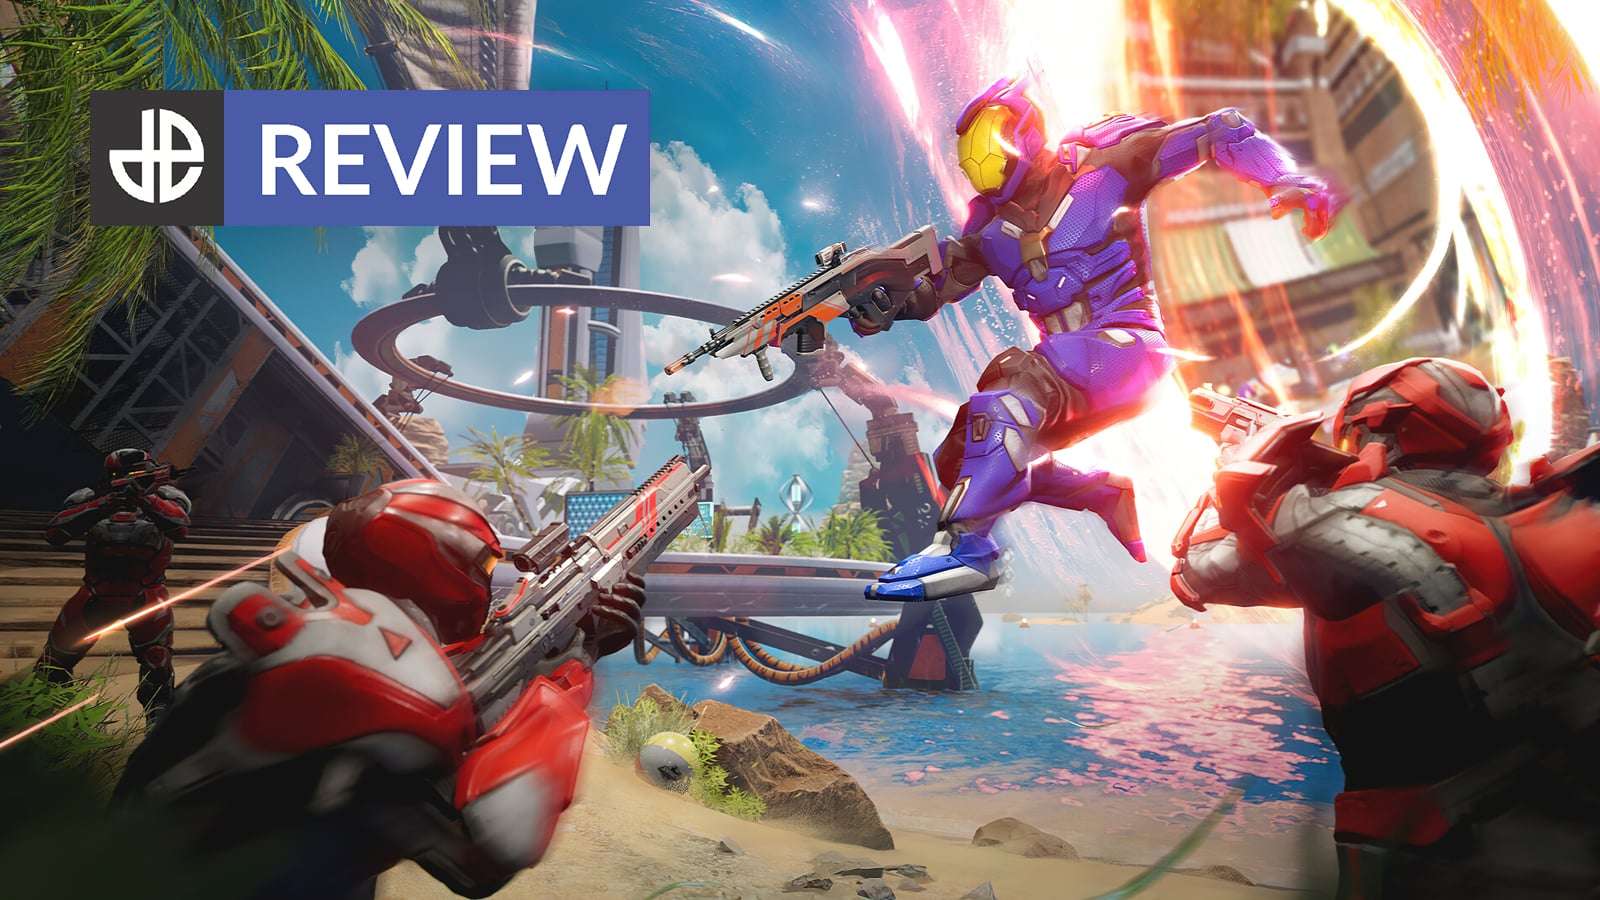 Splitgate is beating Halo at its own game with modern Portal gameplay.